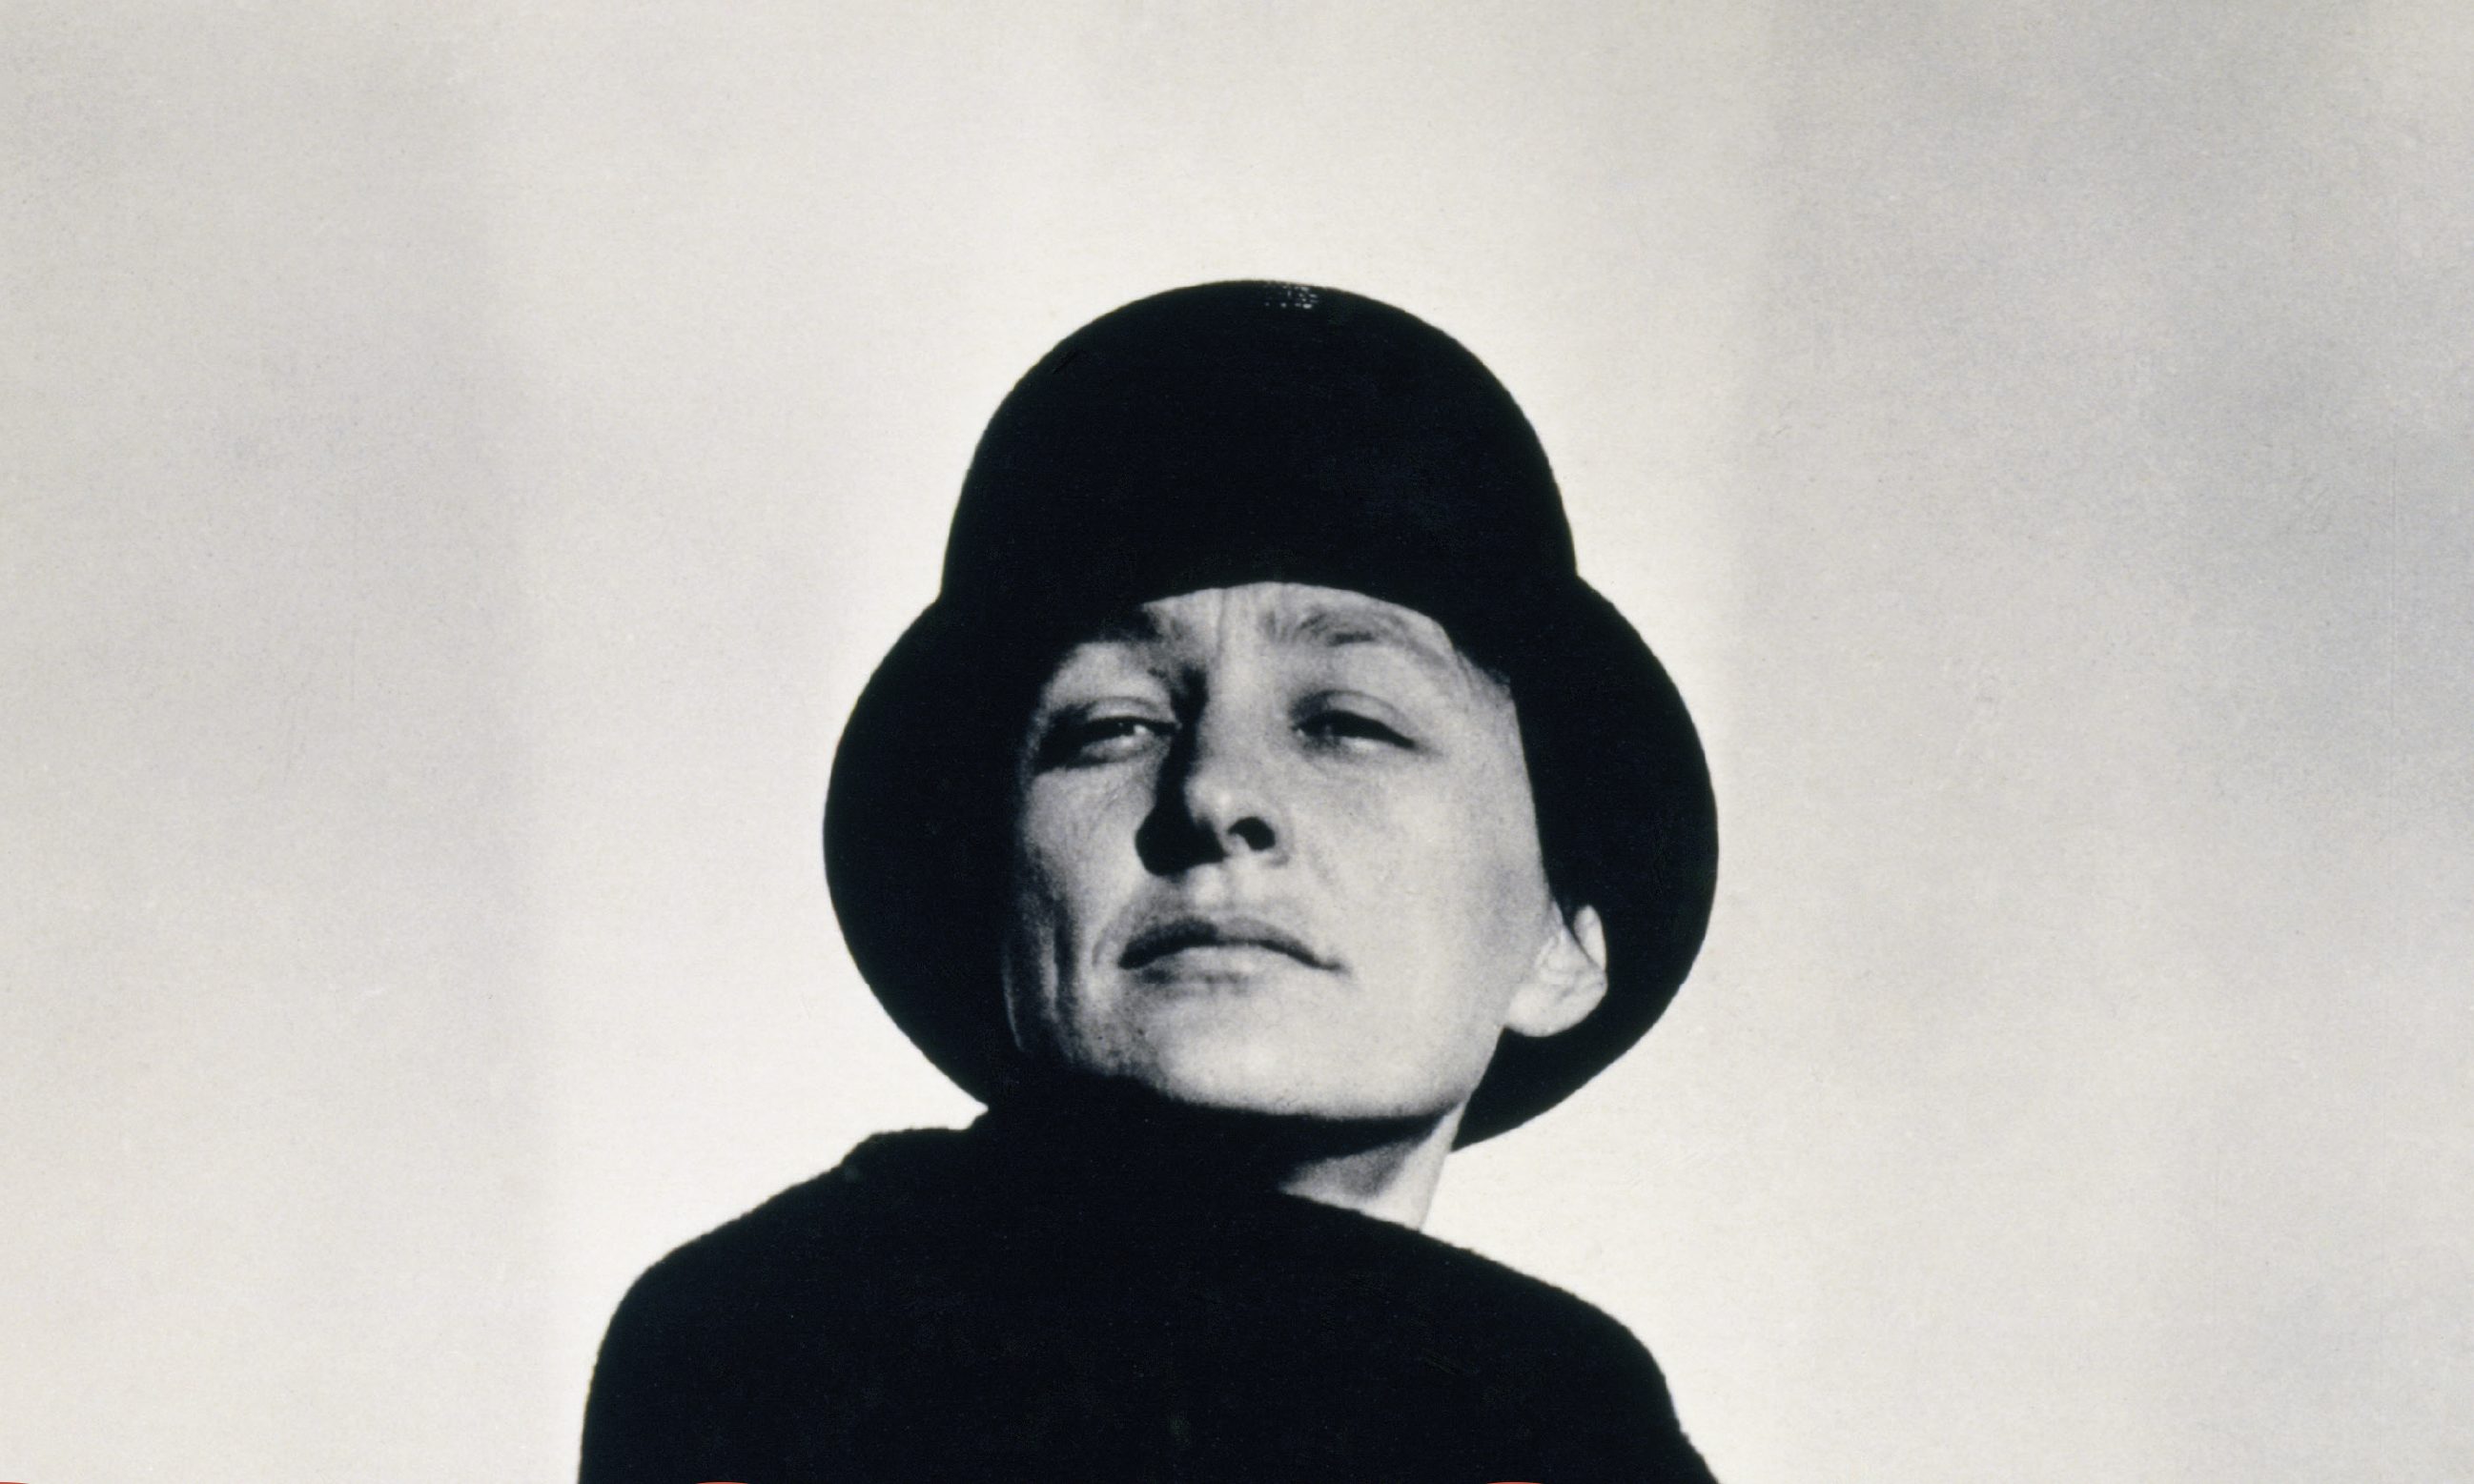 Book cover for "Georgia O'Keeffe Living Modern" featuring a woman wearing black clothes and a black hat